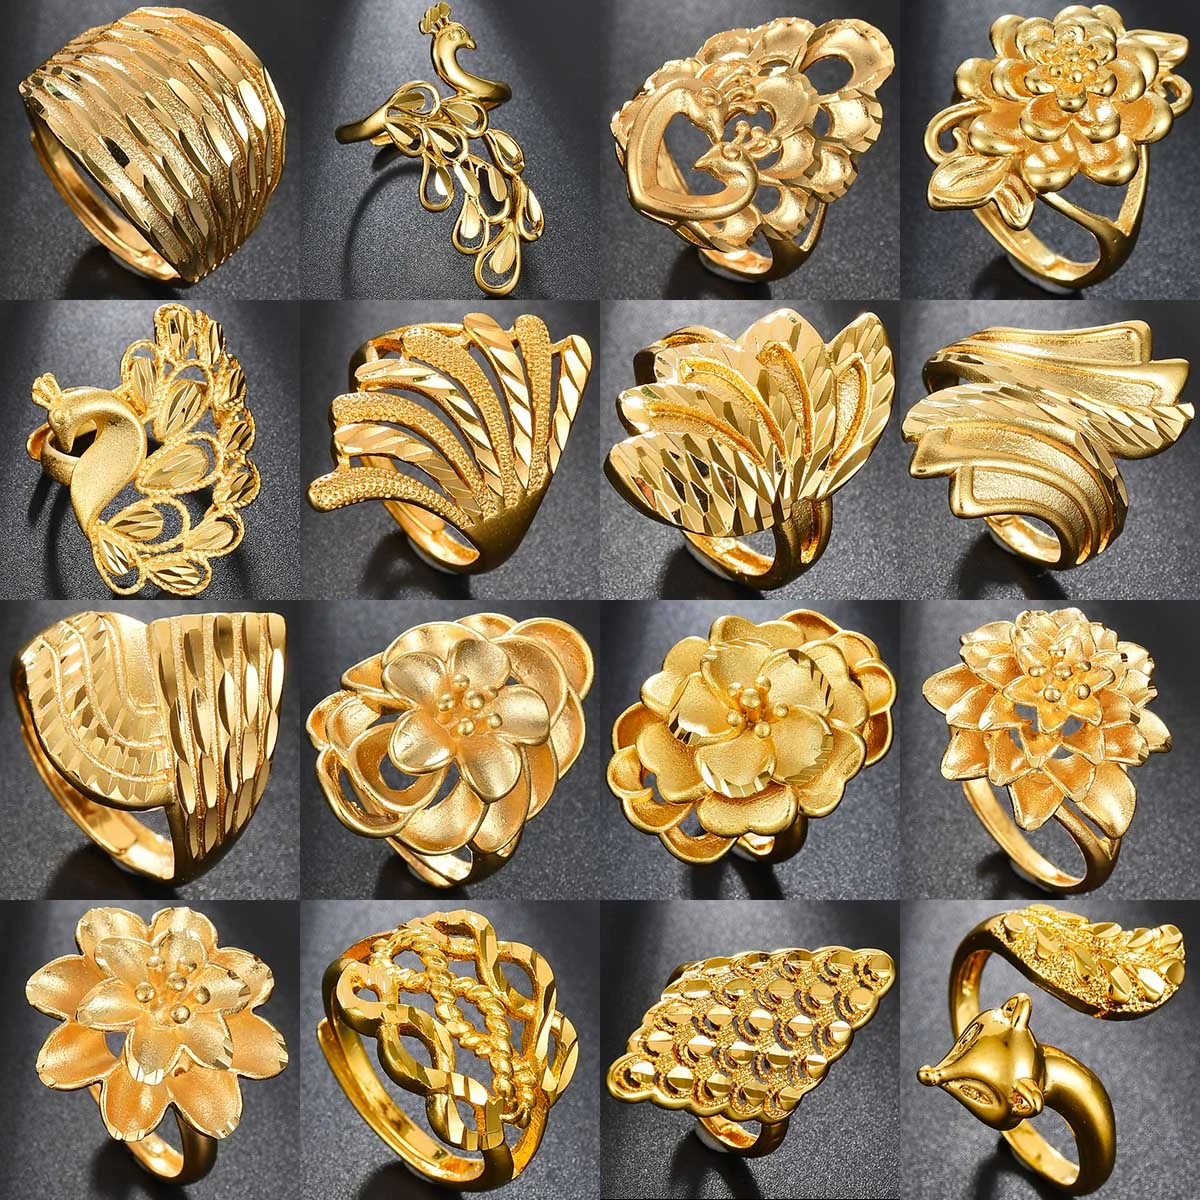 30 Styles Punk Rock Eagle Mens' Ring Luxury Gold Color Resizeable Flowers/Peacock/Leaves Women Ring Never Fade